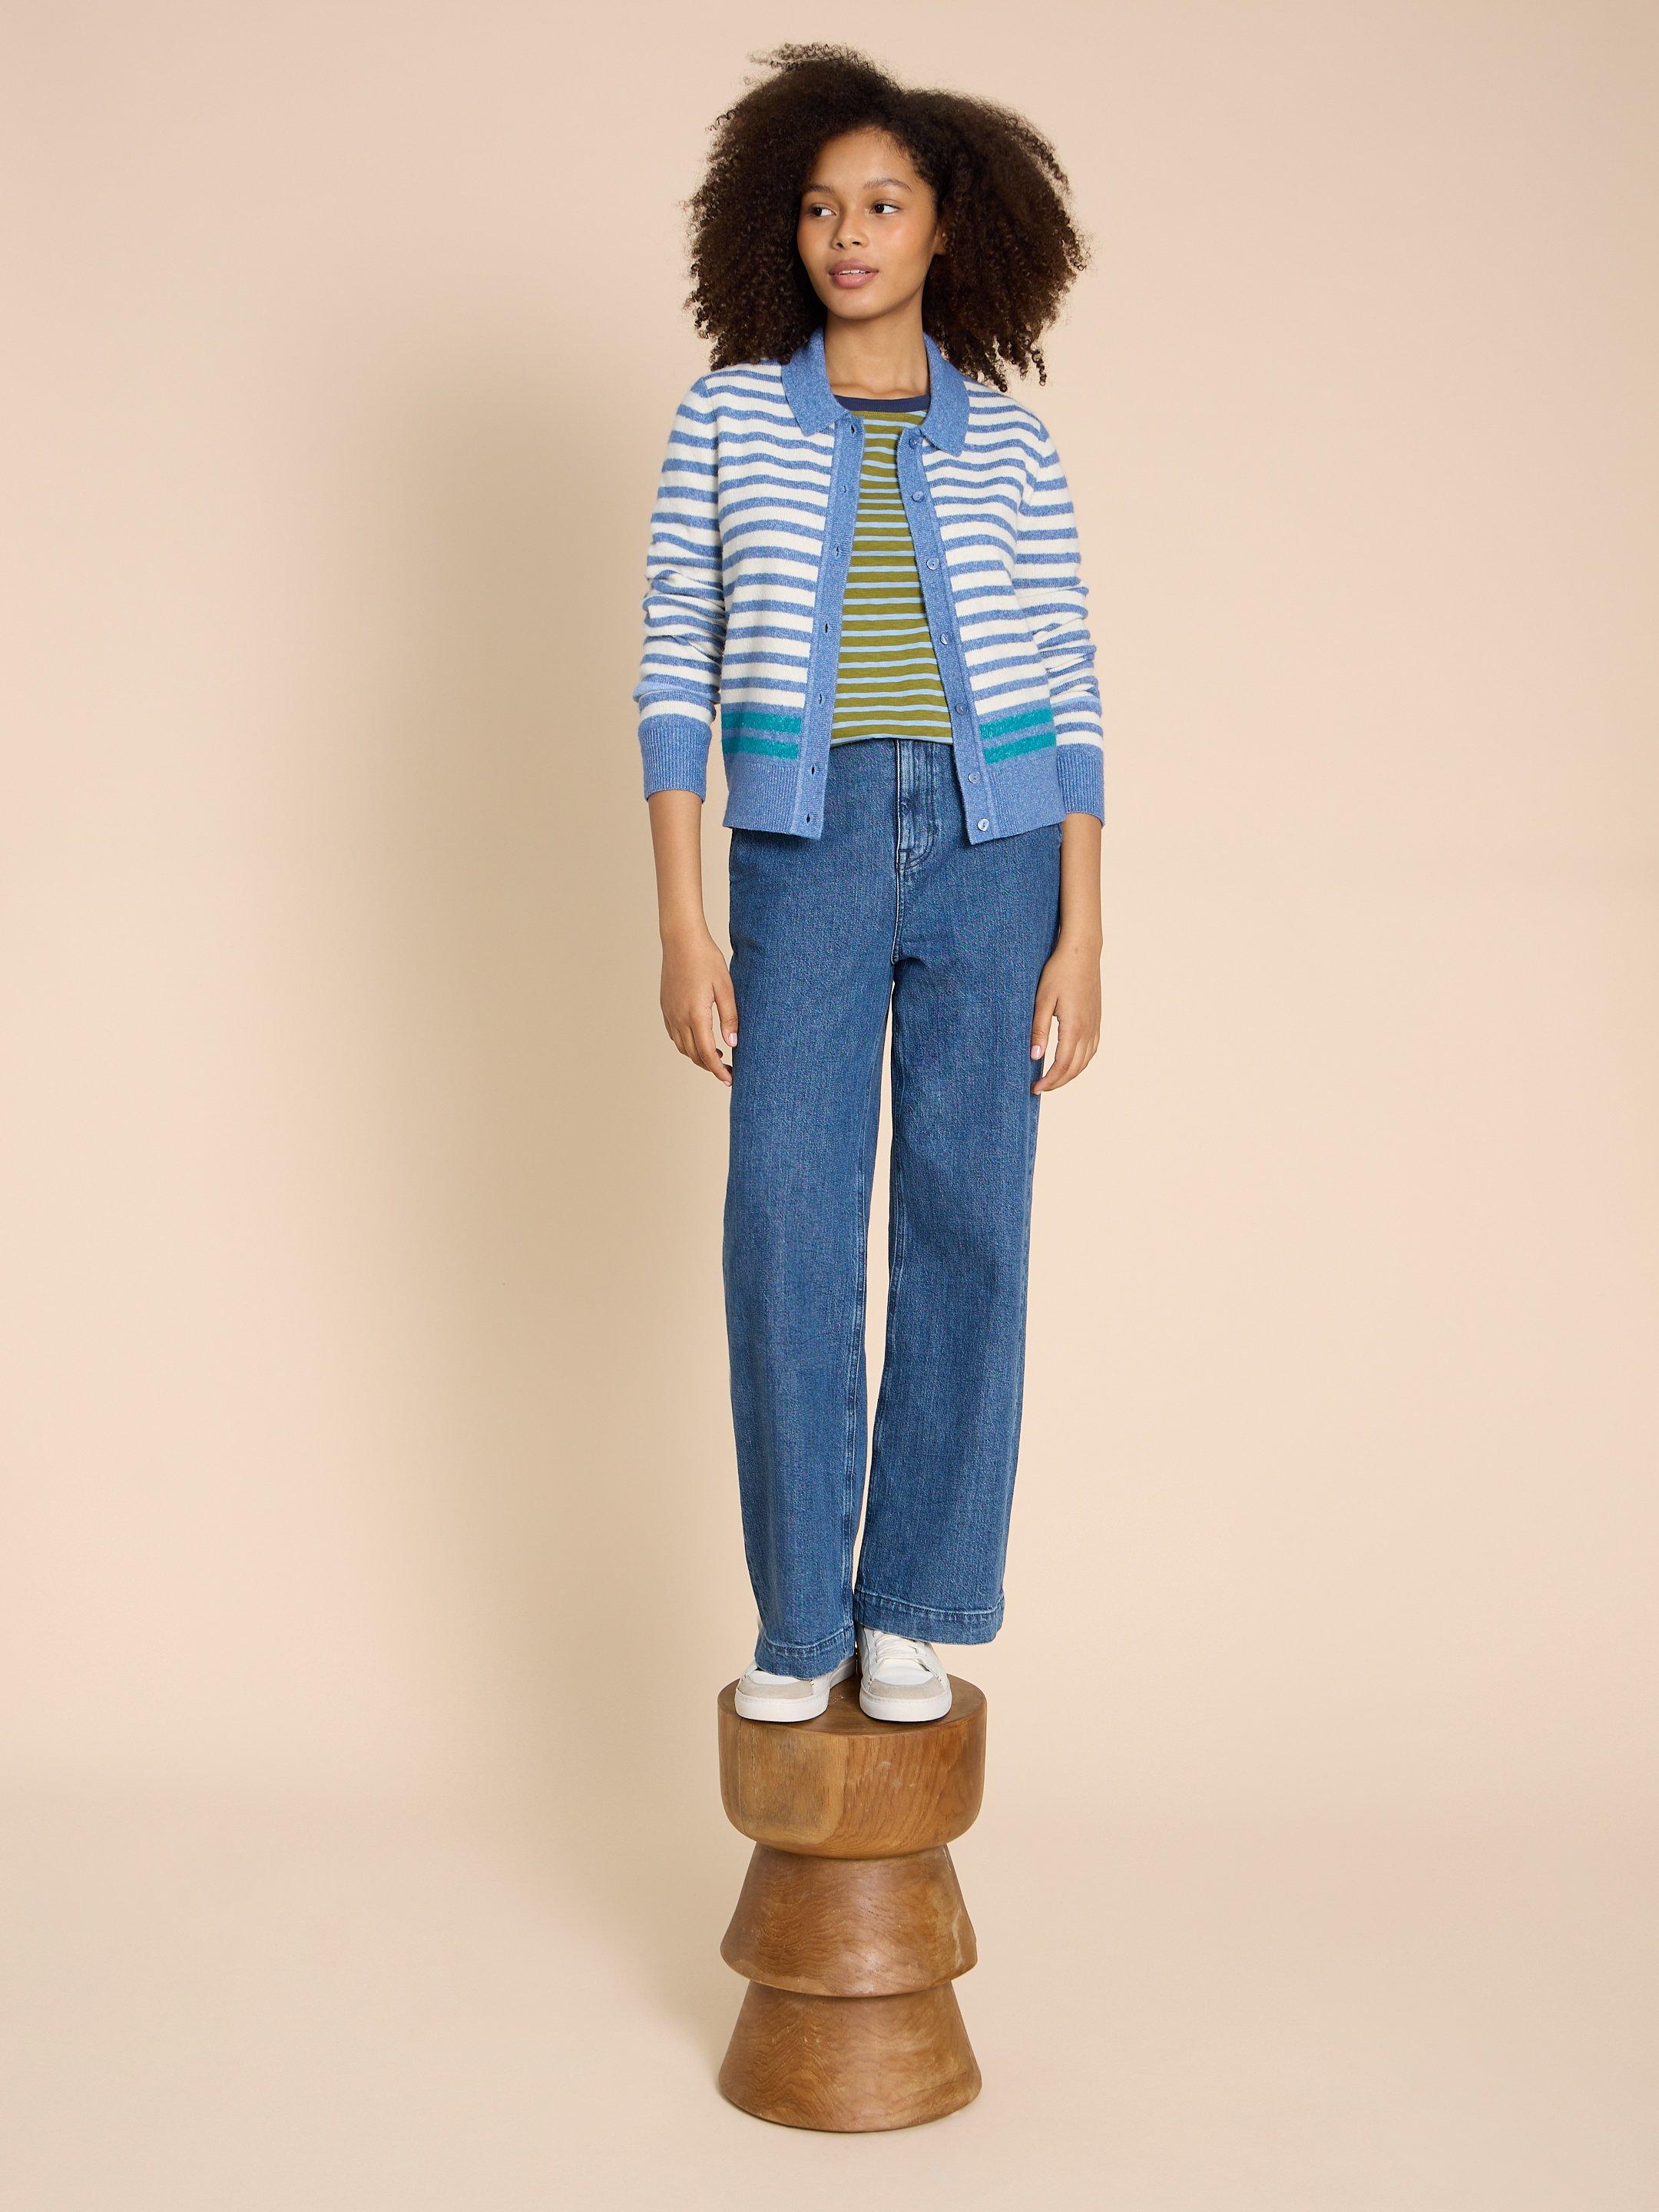 PEONY COLLARED CARDIGAN in BLUE MLT - LIFESTYLE